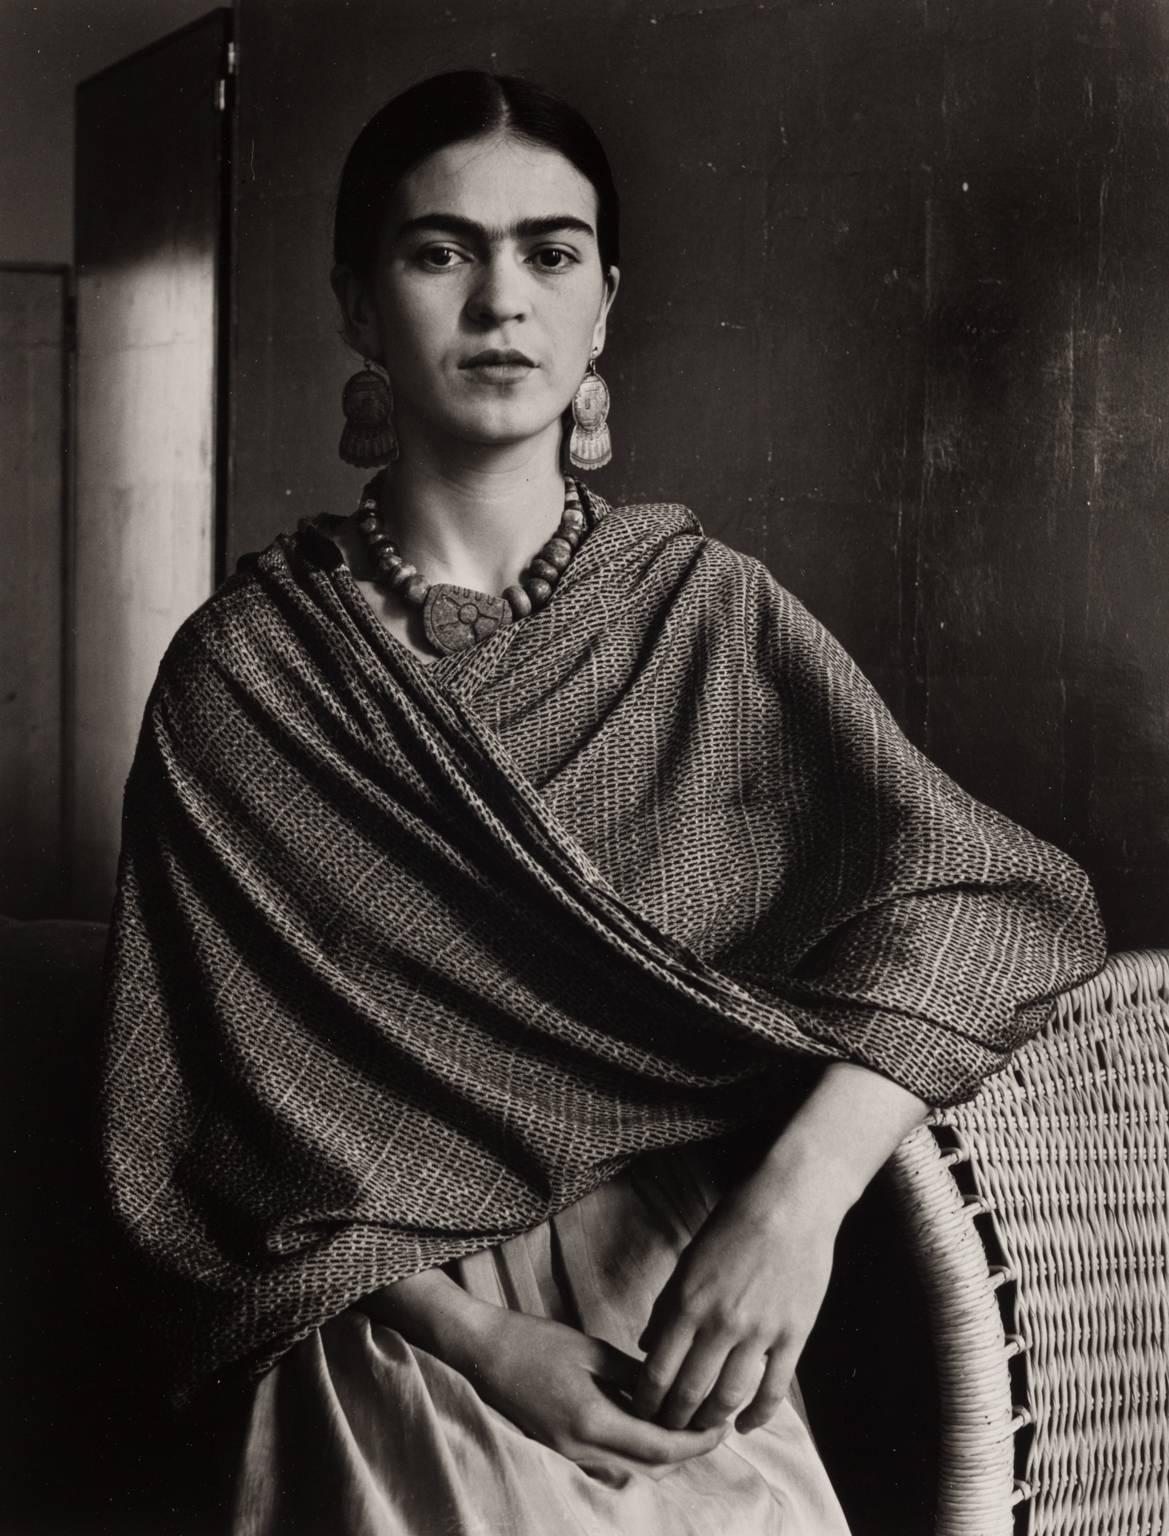 Imogen Cunningham Portrait Photograph - Frida Kahlo, painter and wife of Diego Rivera